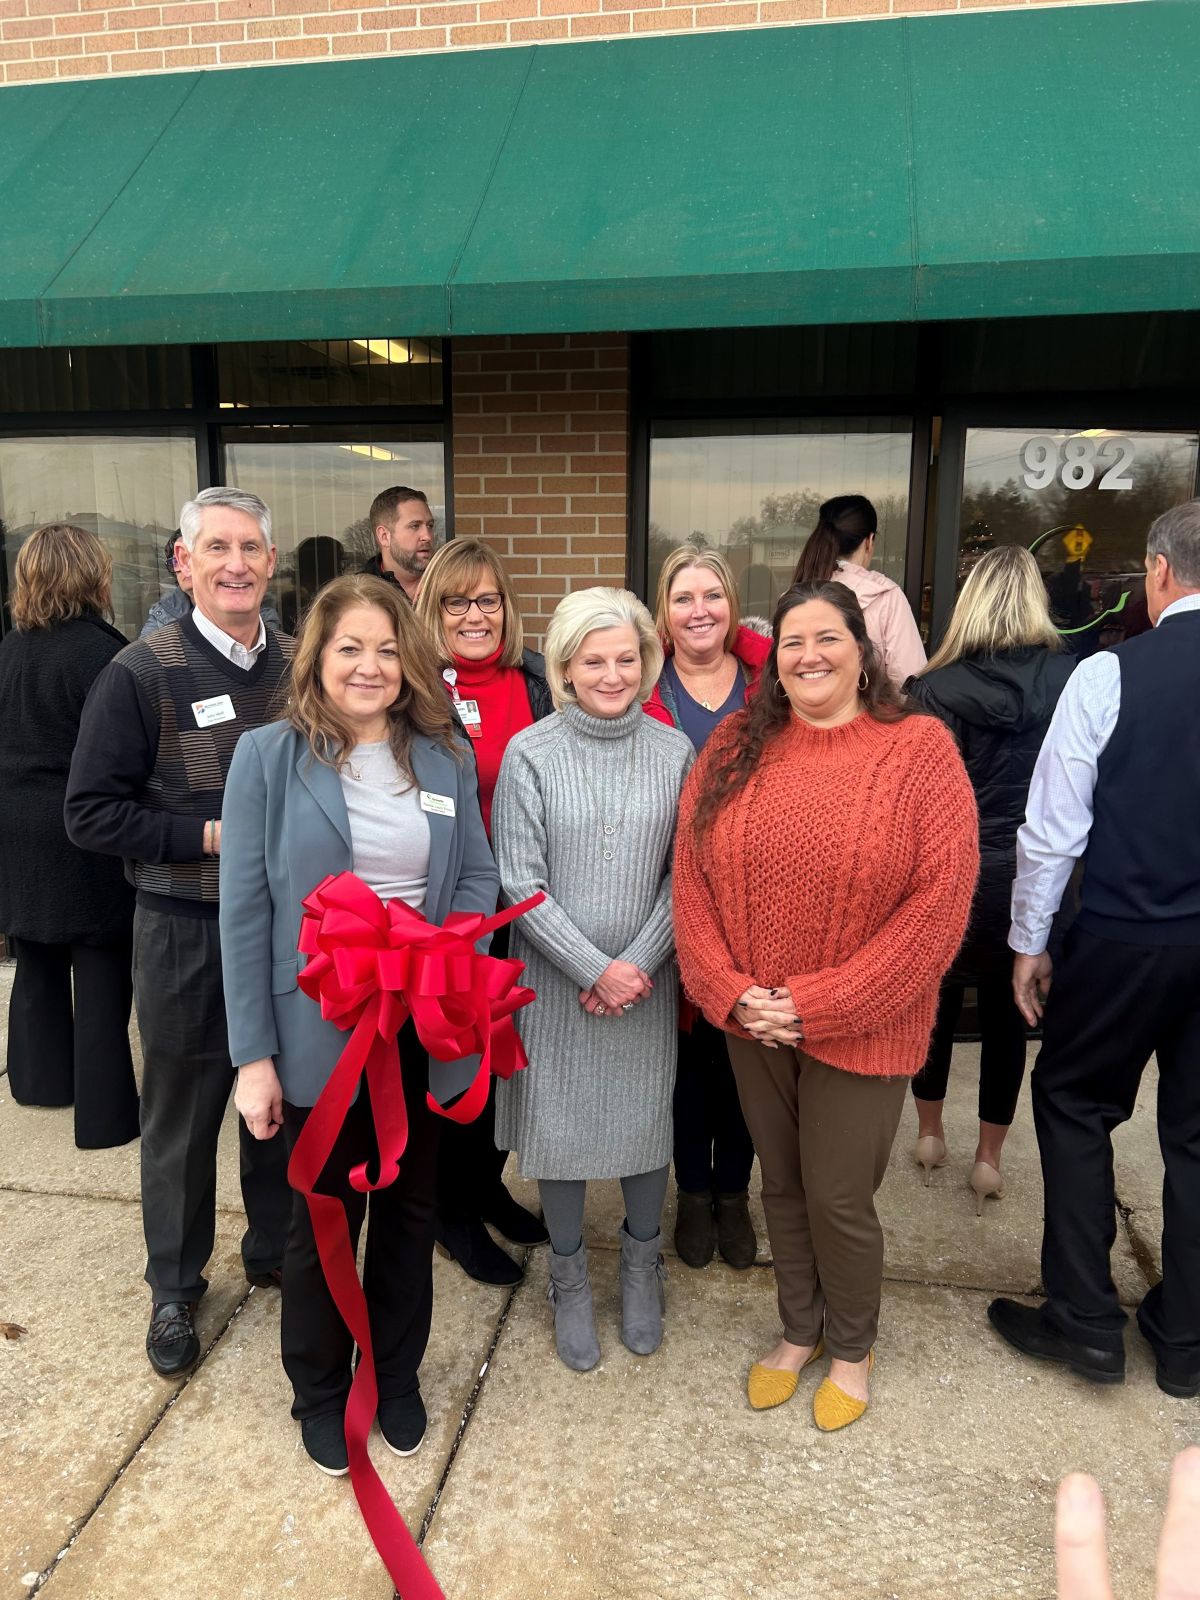 Growth Dimensions Hosts Open House and Ribbon Cutting at New Location Photo